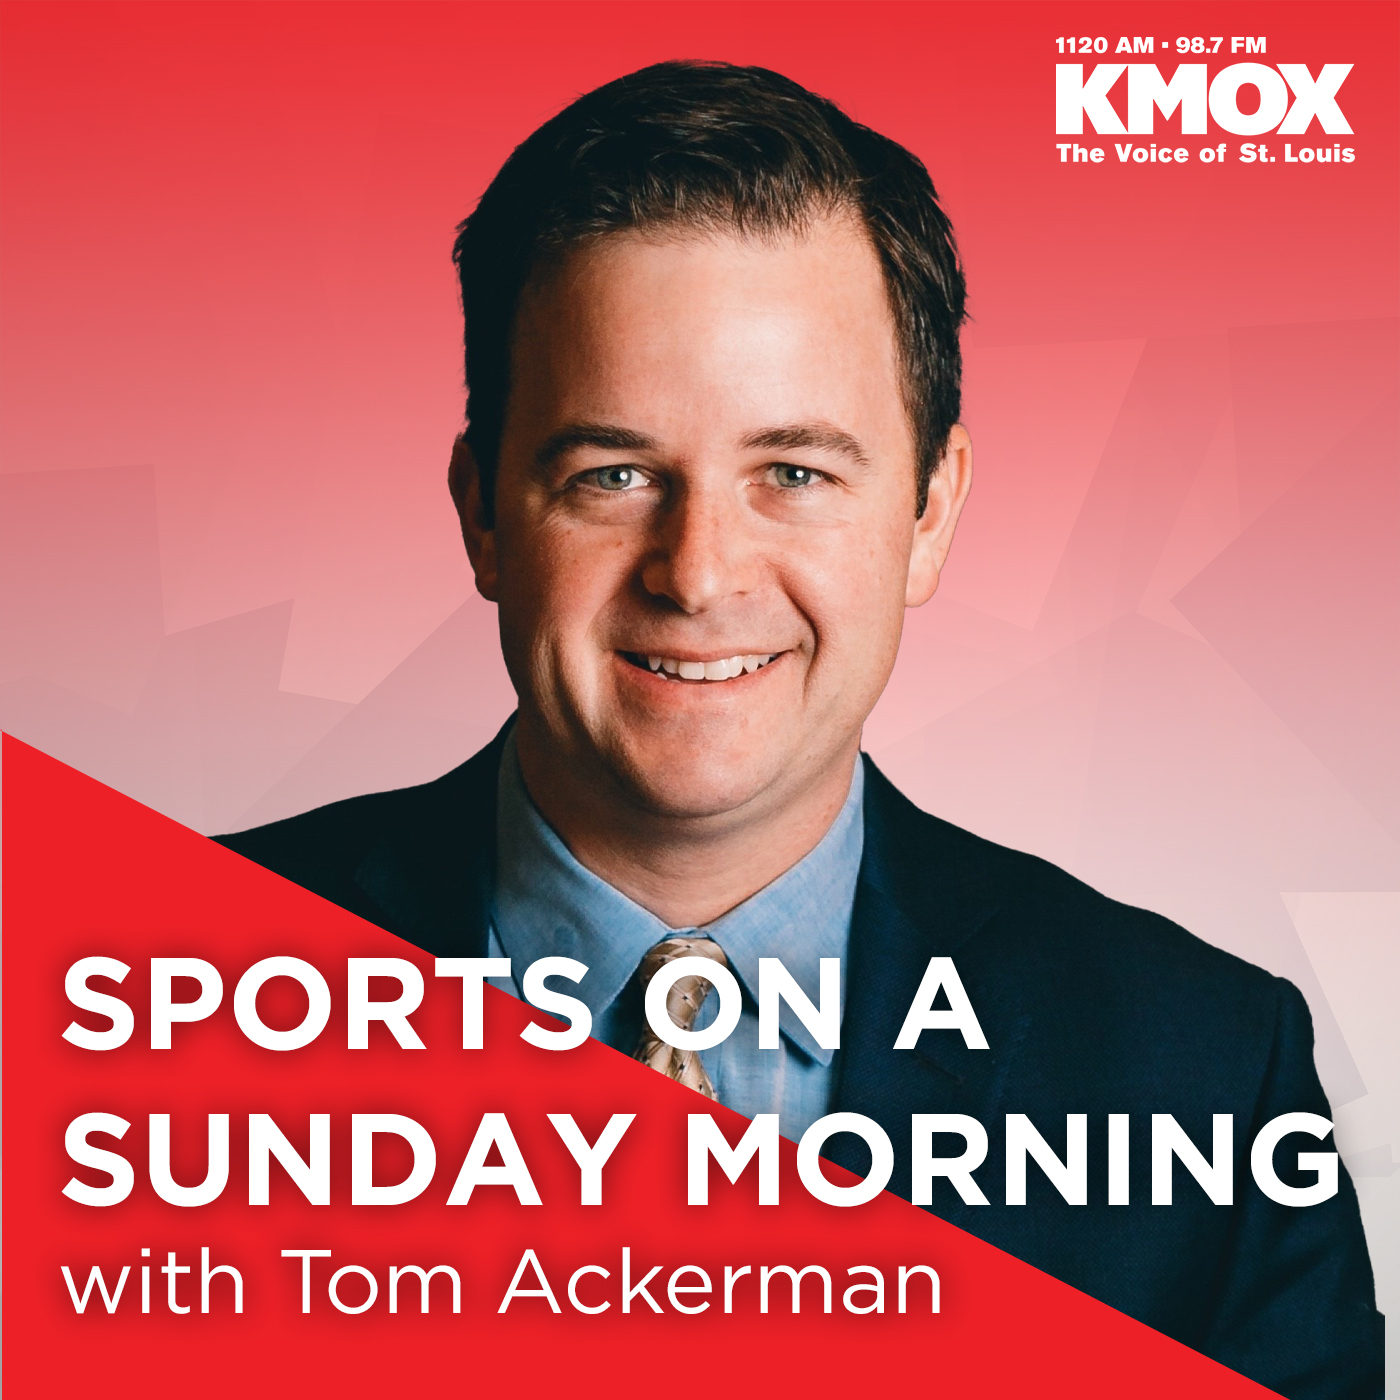 Hour 2 - Cardinals Insights & Community Impact